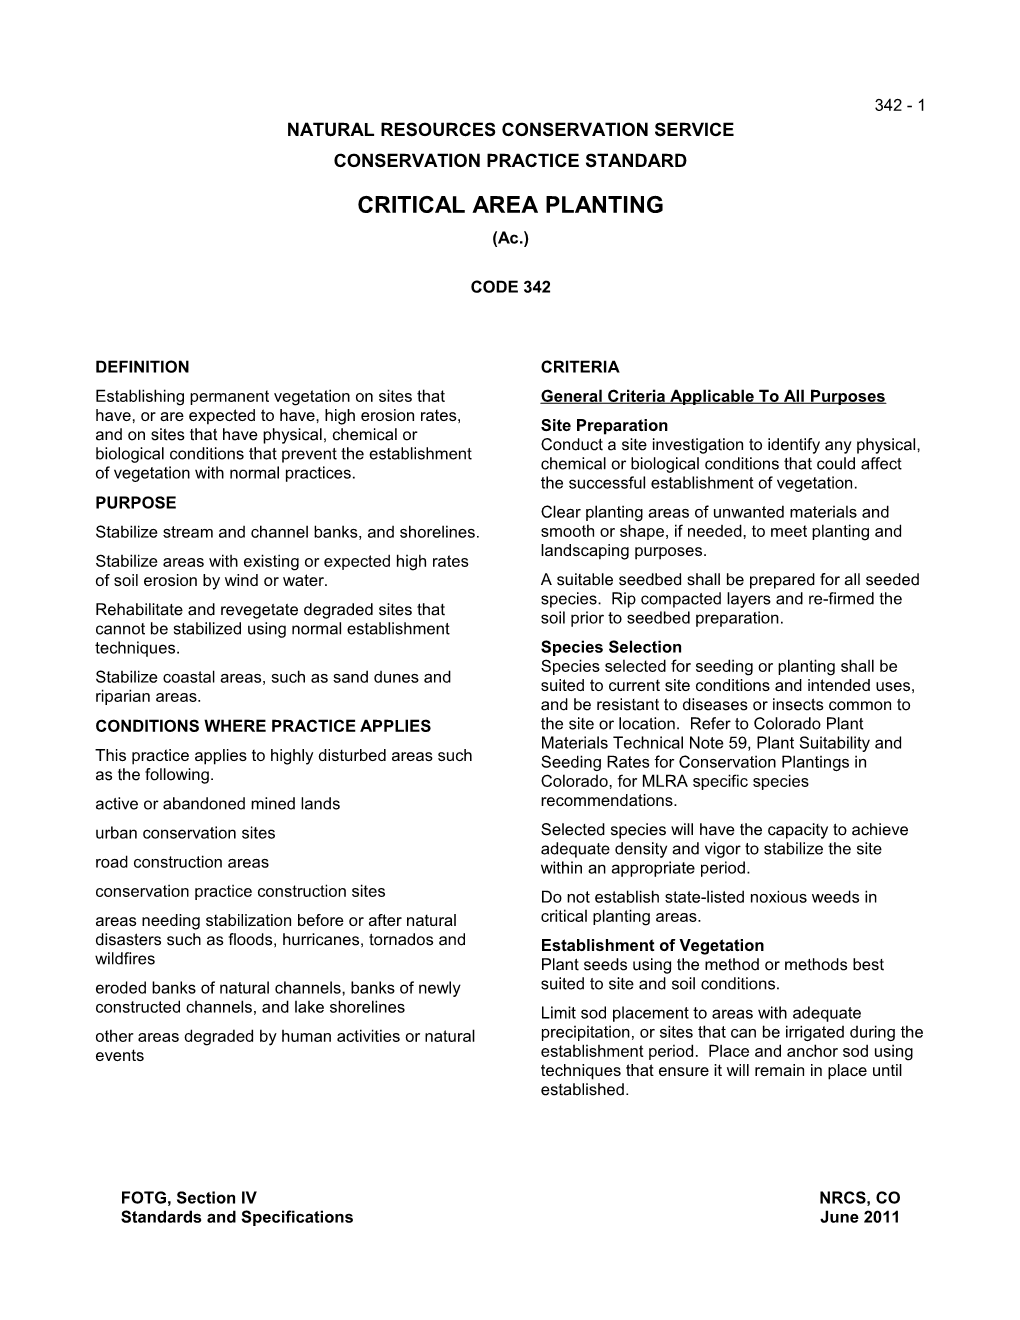 Critical Area Planting (342) Conservation Practice Standard